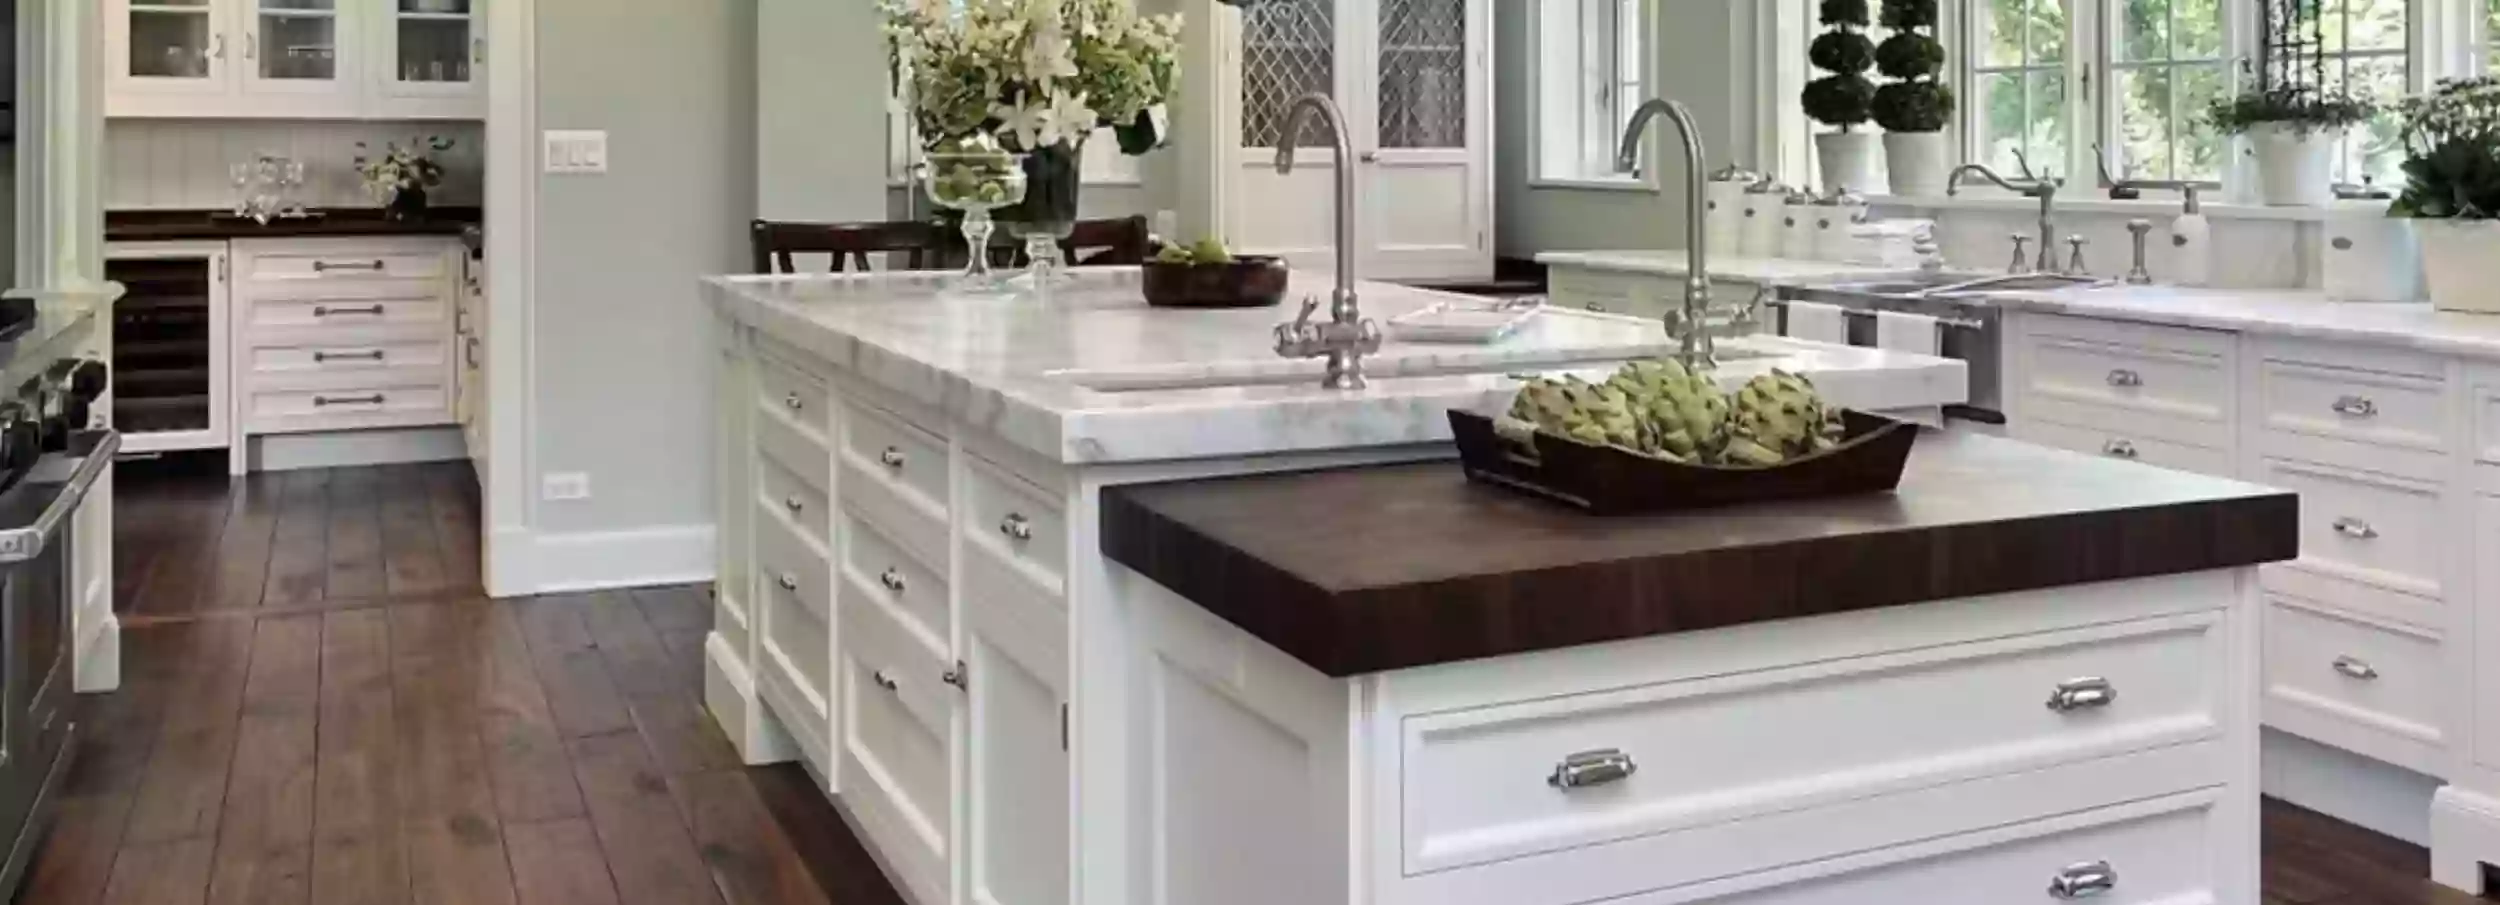 Large farm kitchen with white cabinets, a center island with black countertops.